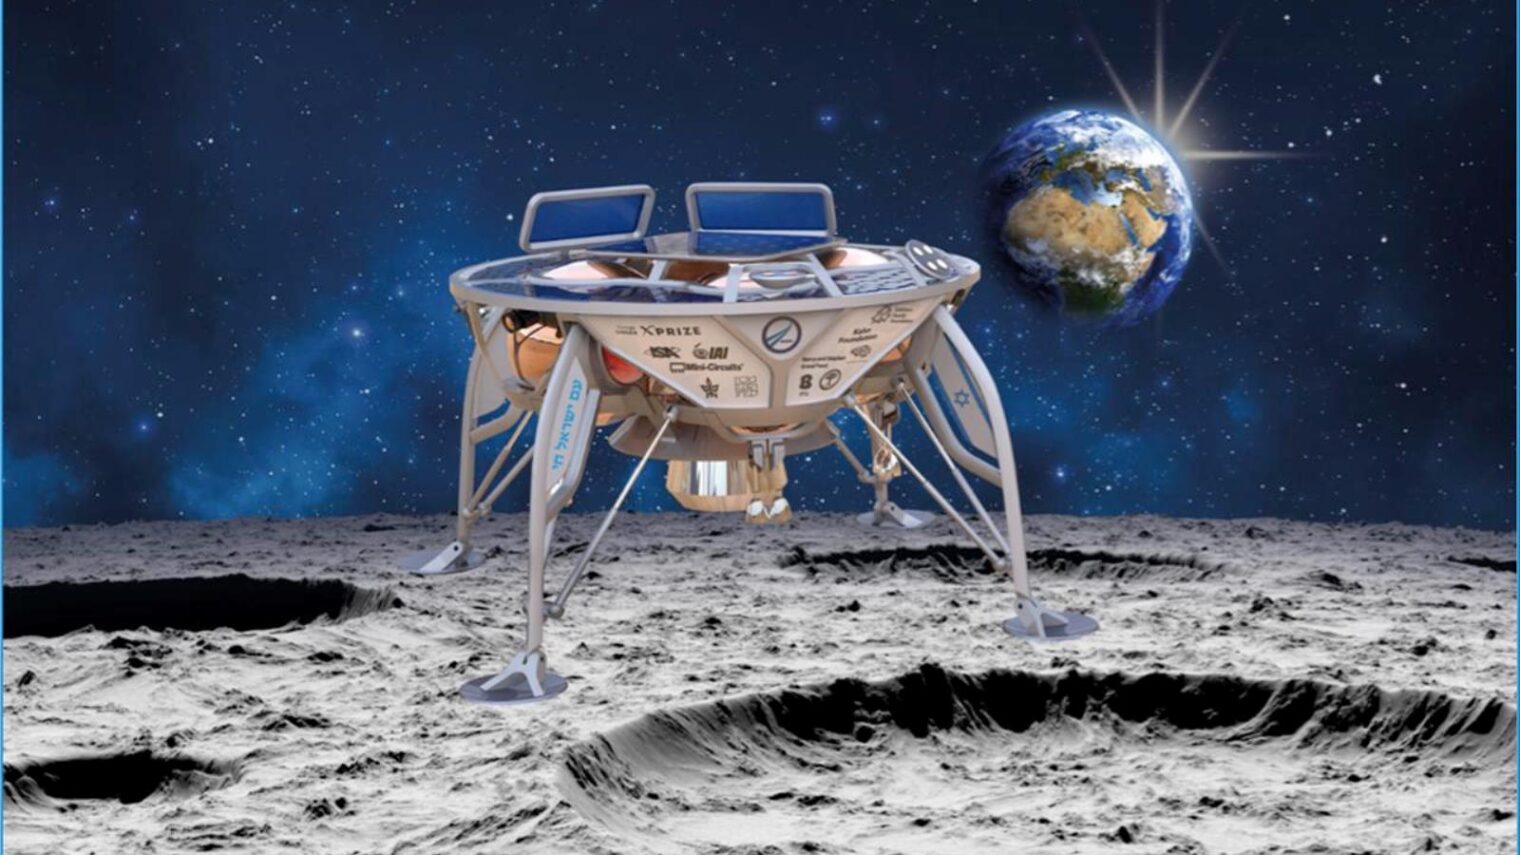 SpaceIL’s lunar module on a simulated moon backdrop. Photo: courtesy